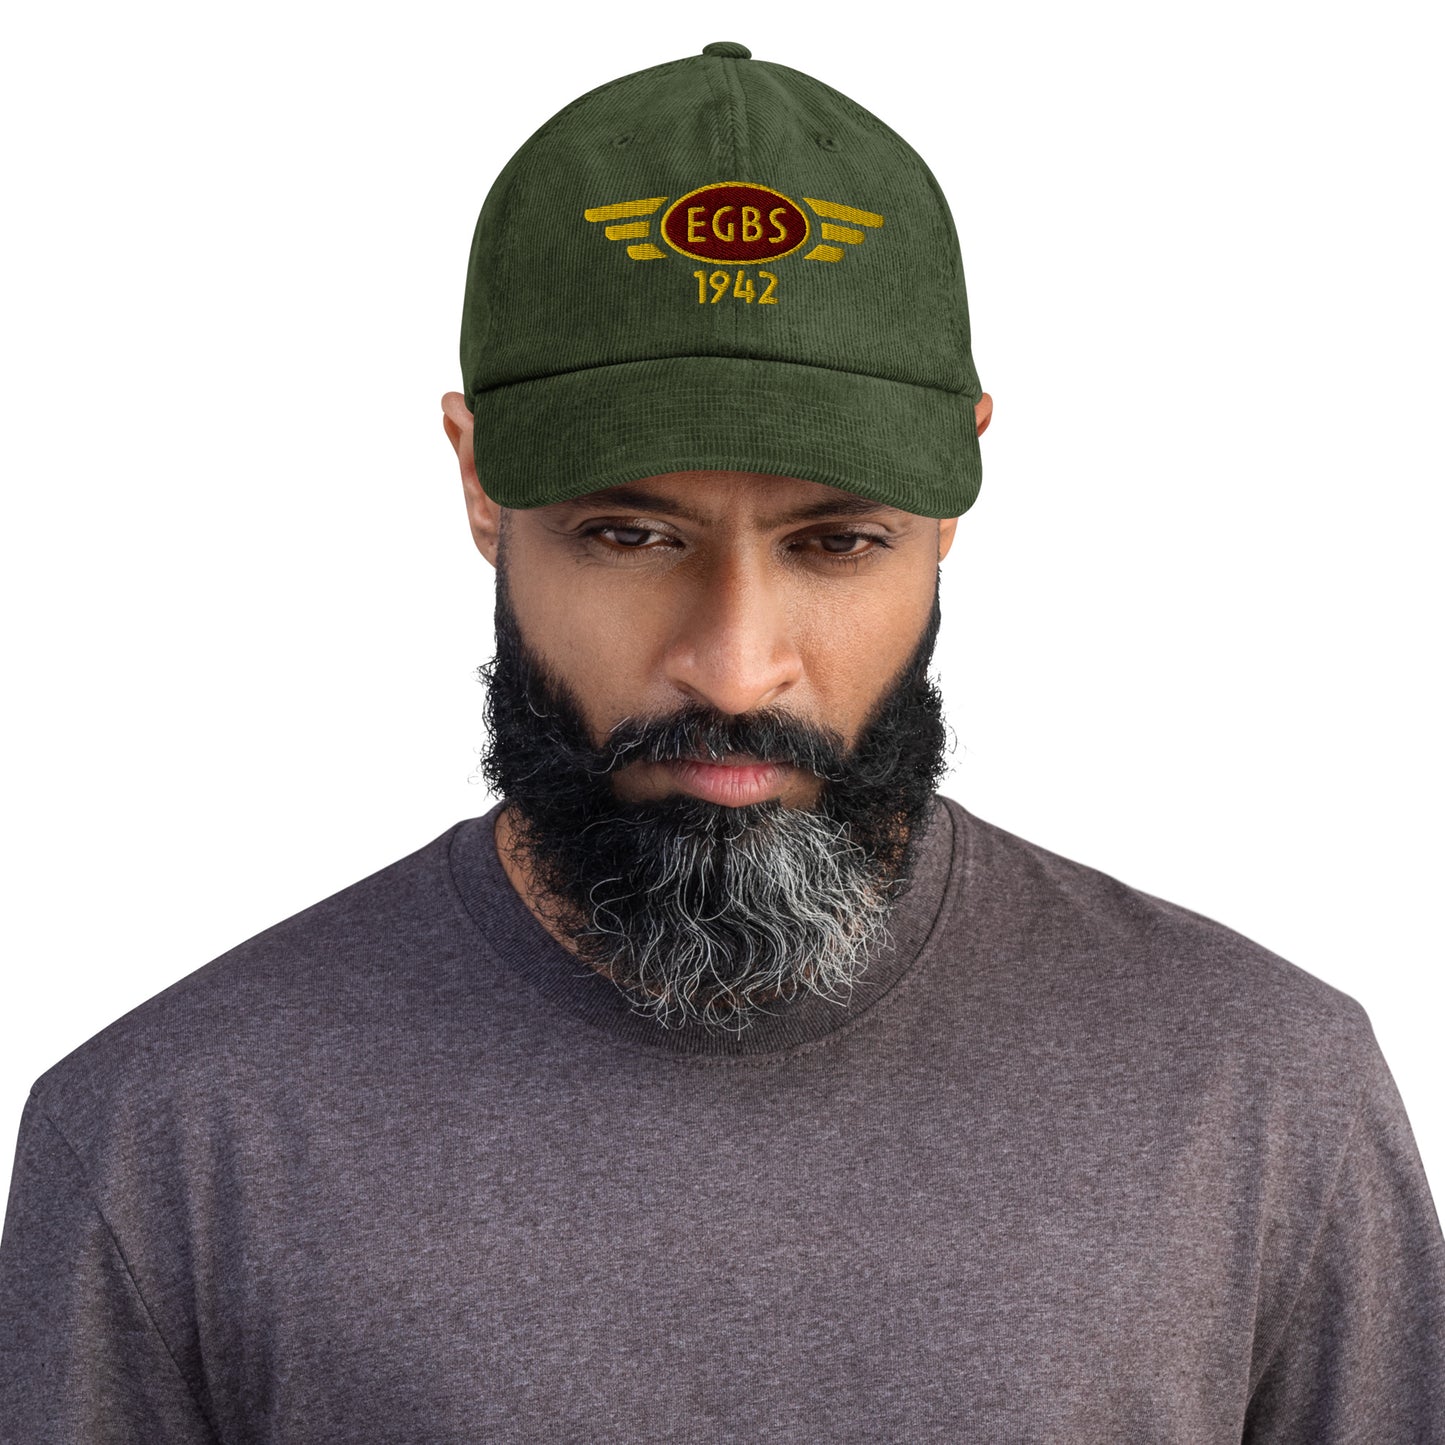 Shobdon Airfield corduroy cap with embroidered ICAO code.